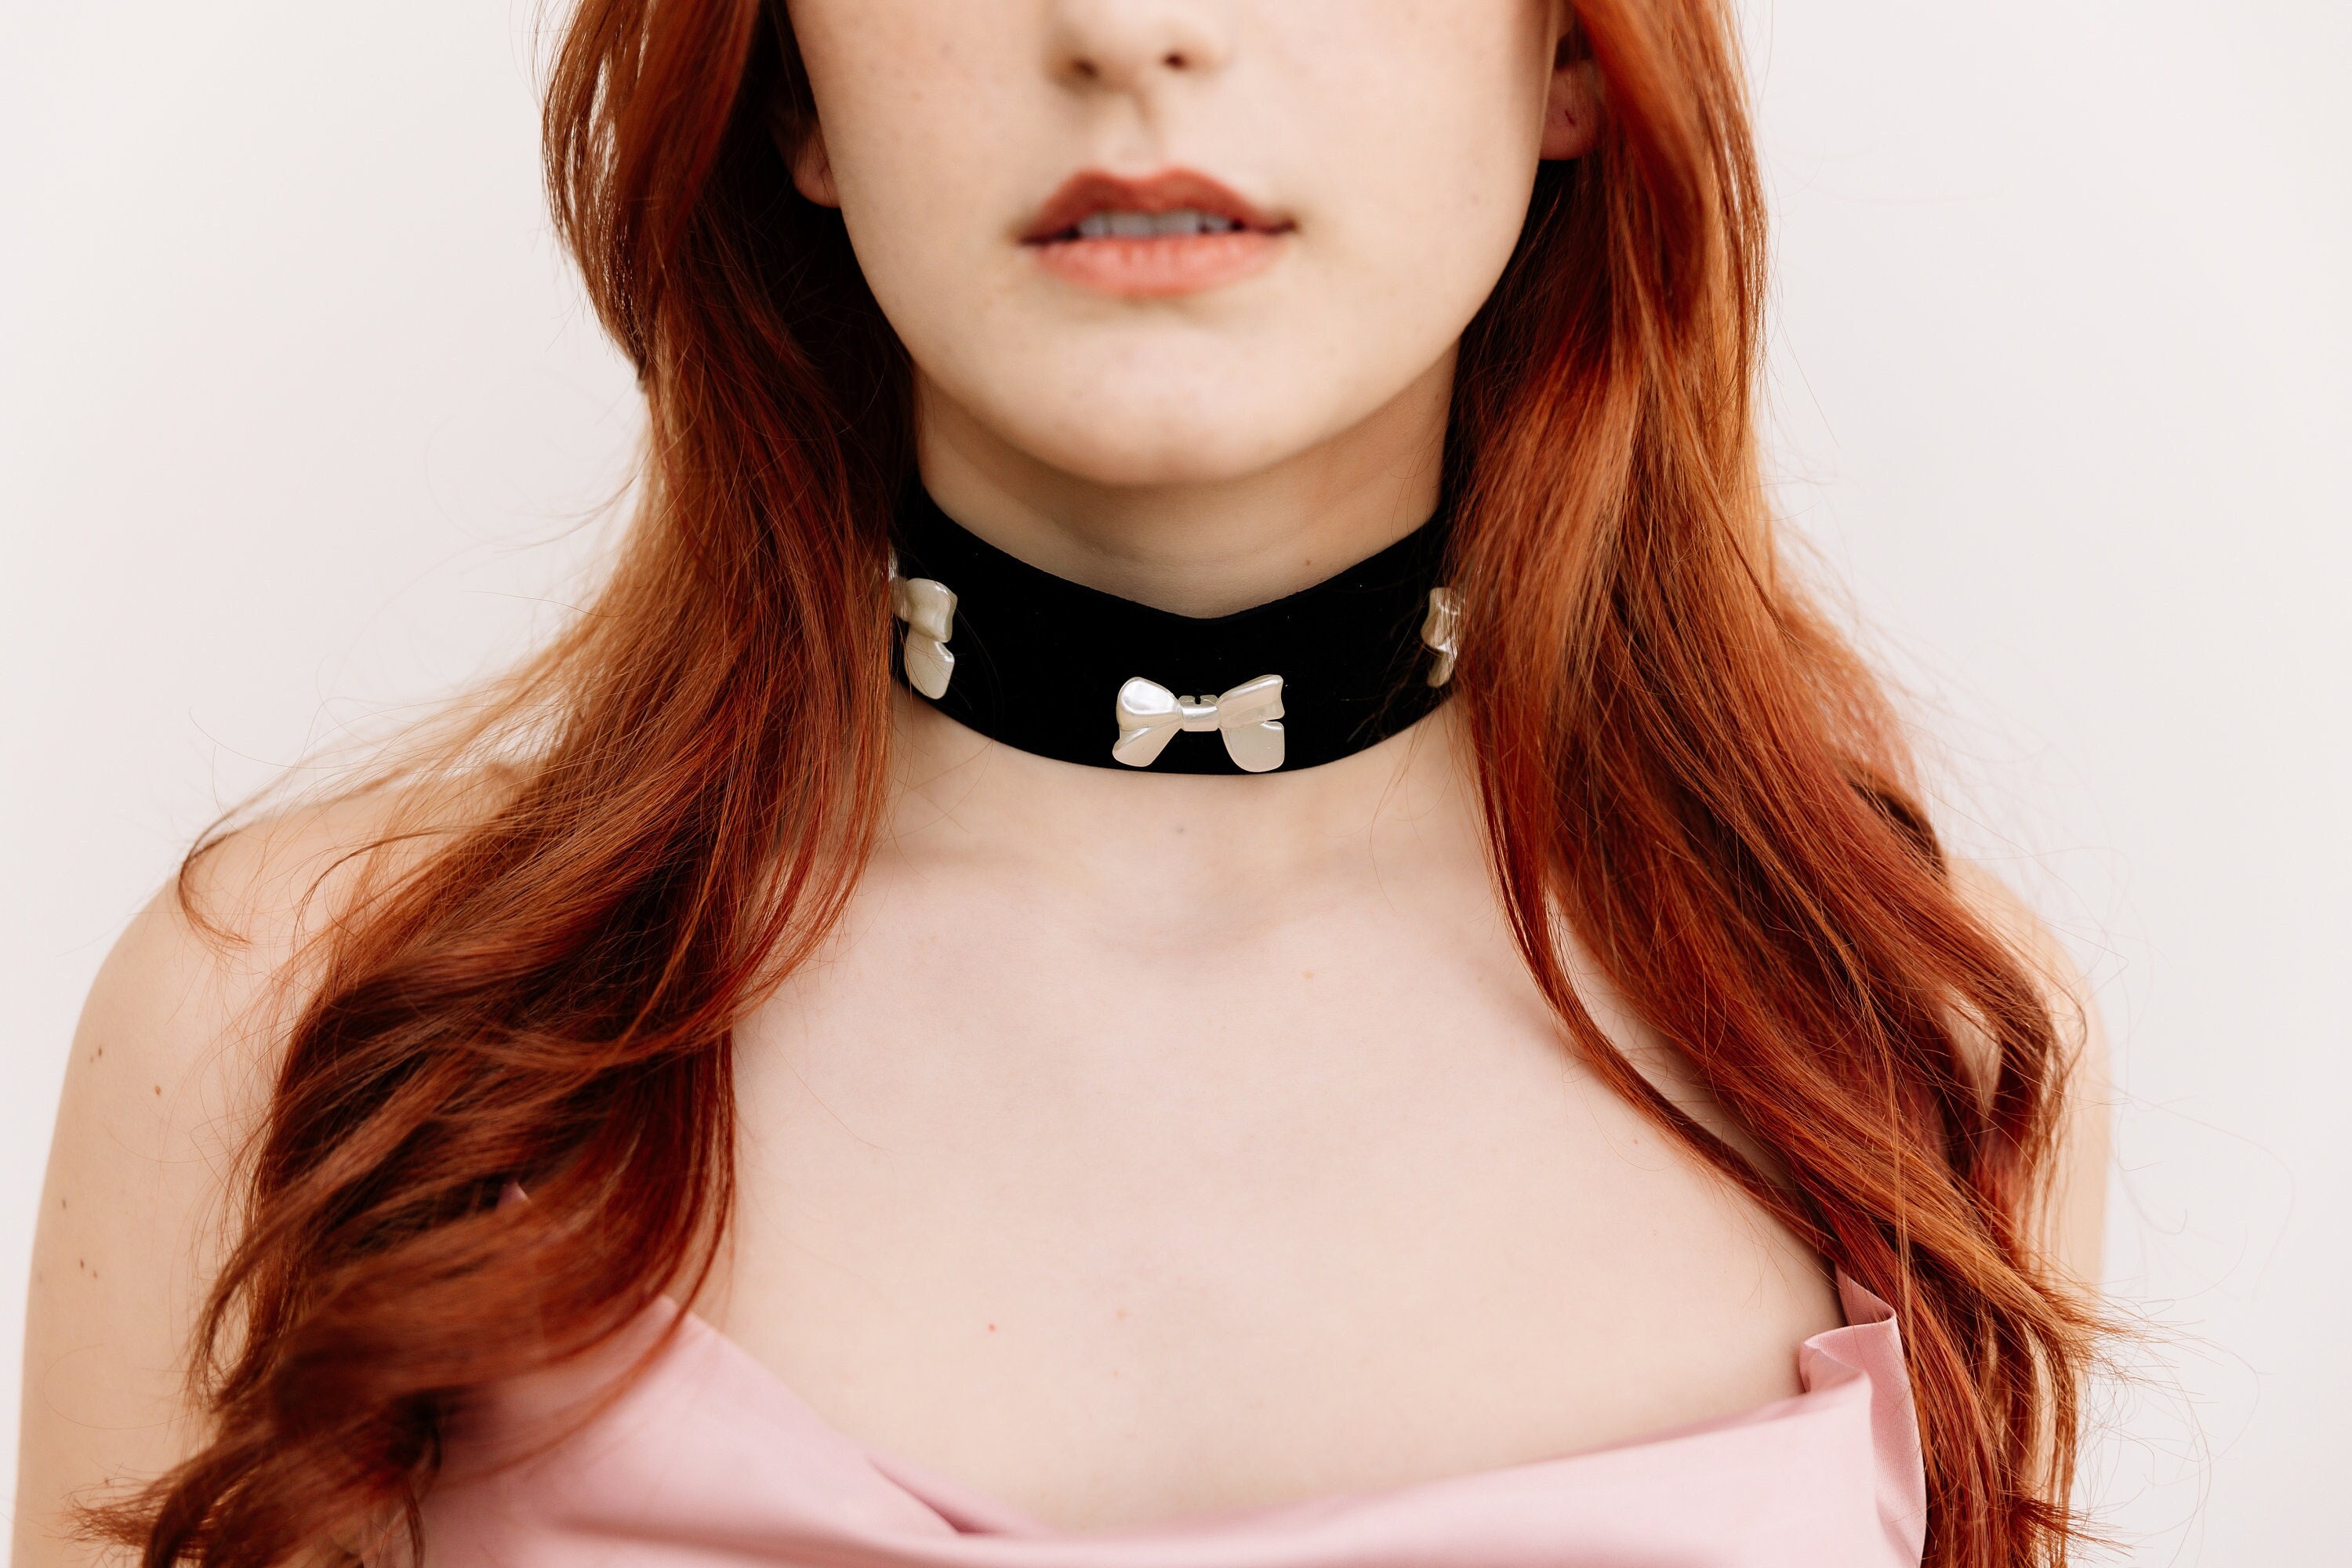 Velvet Choker Necklace With Bows Retro 90s Accessories Black and White  Jewelry Lolita Style -  Denmark